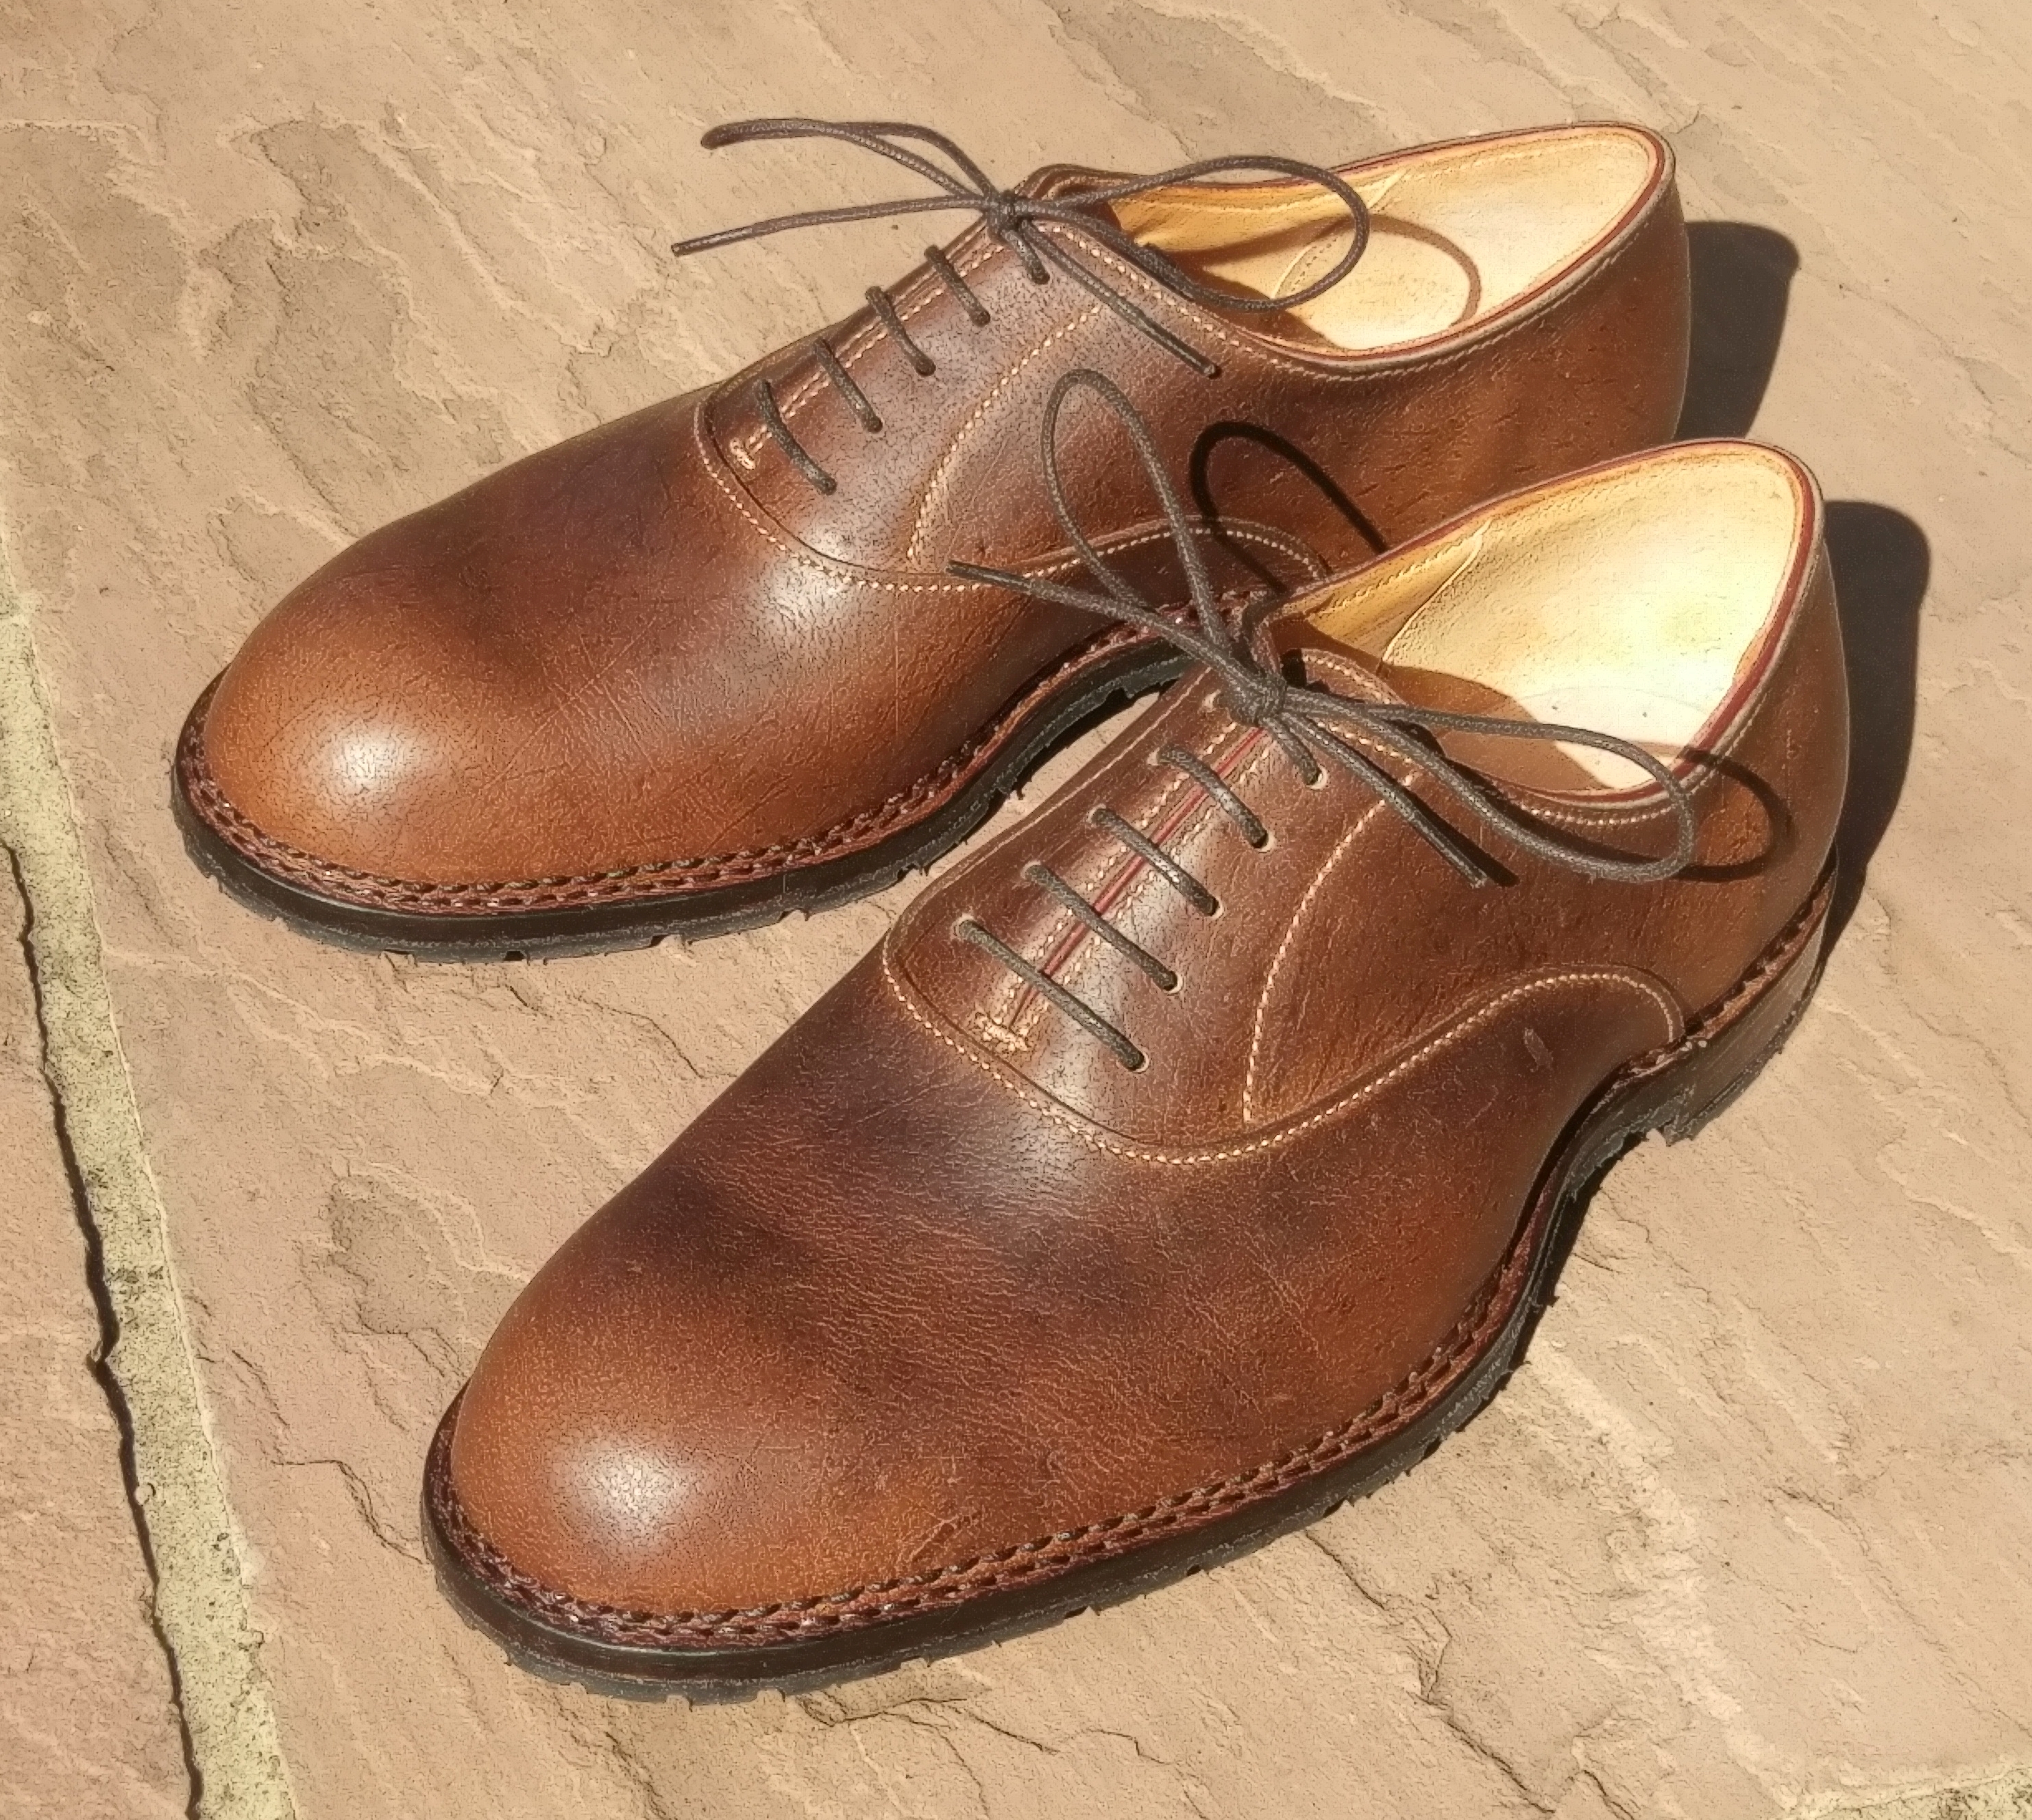 Gents Oxfords with Norwegian Welt and tyre sole, in CFS African Kudu - Dogged - made by Philip Bishop